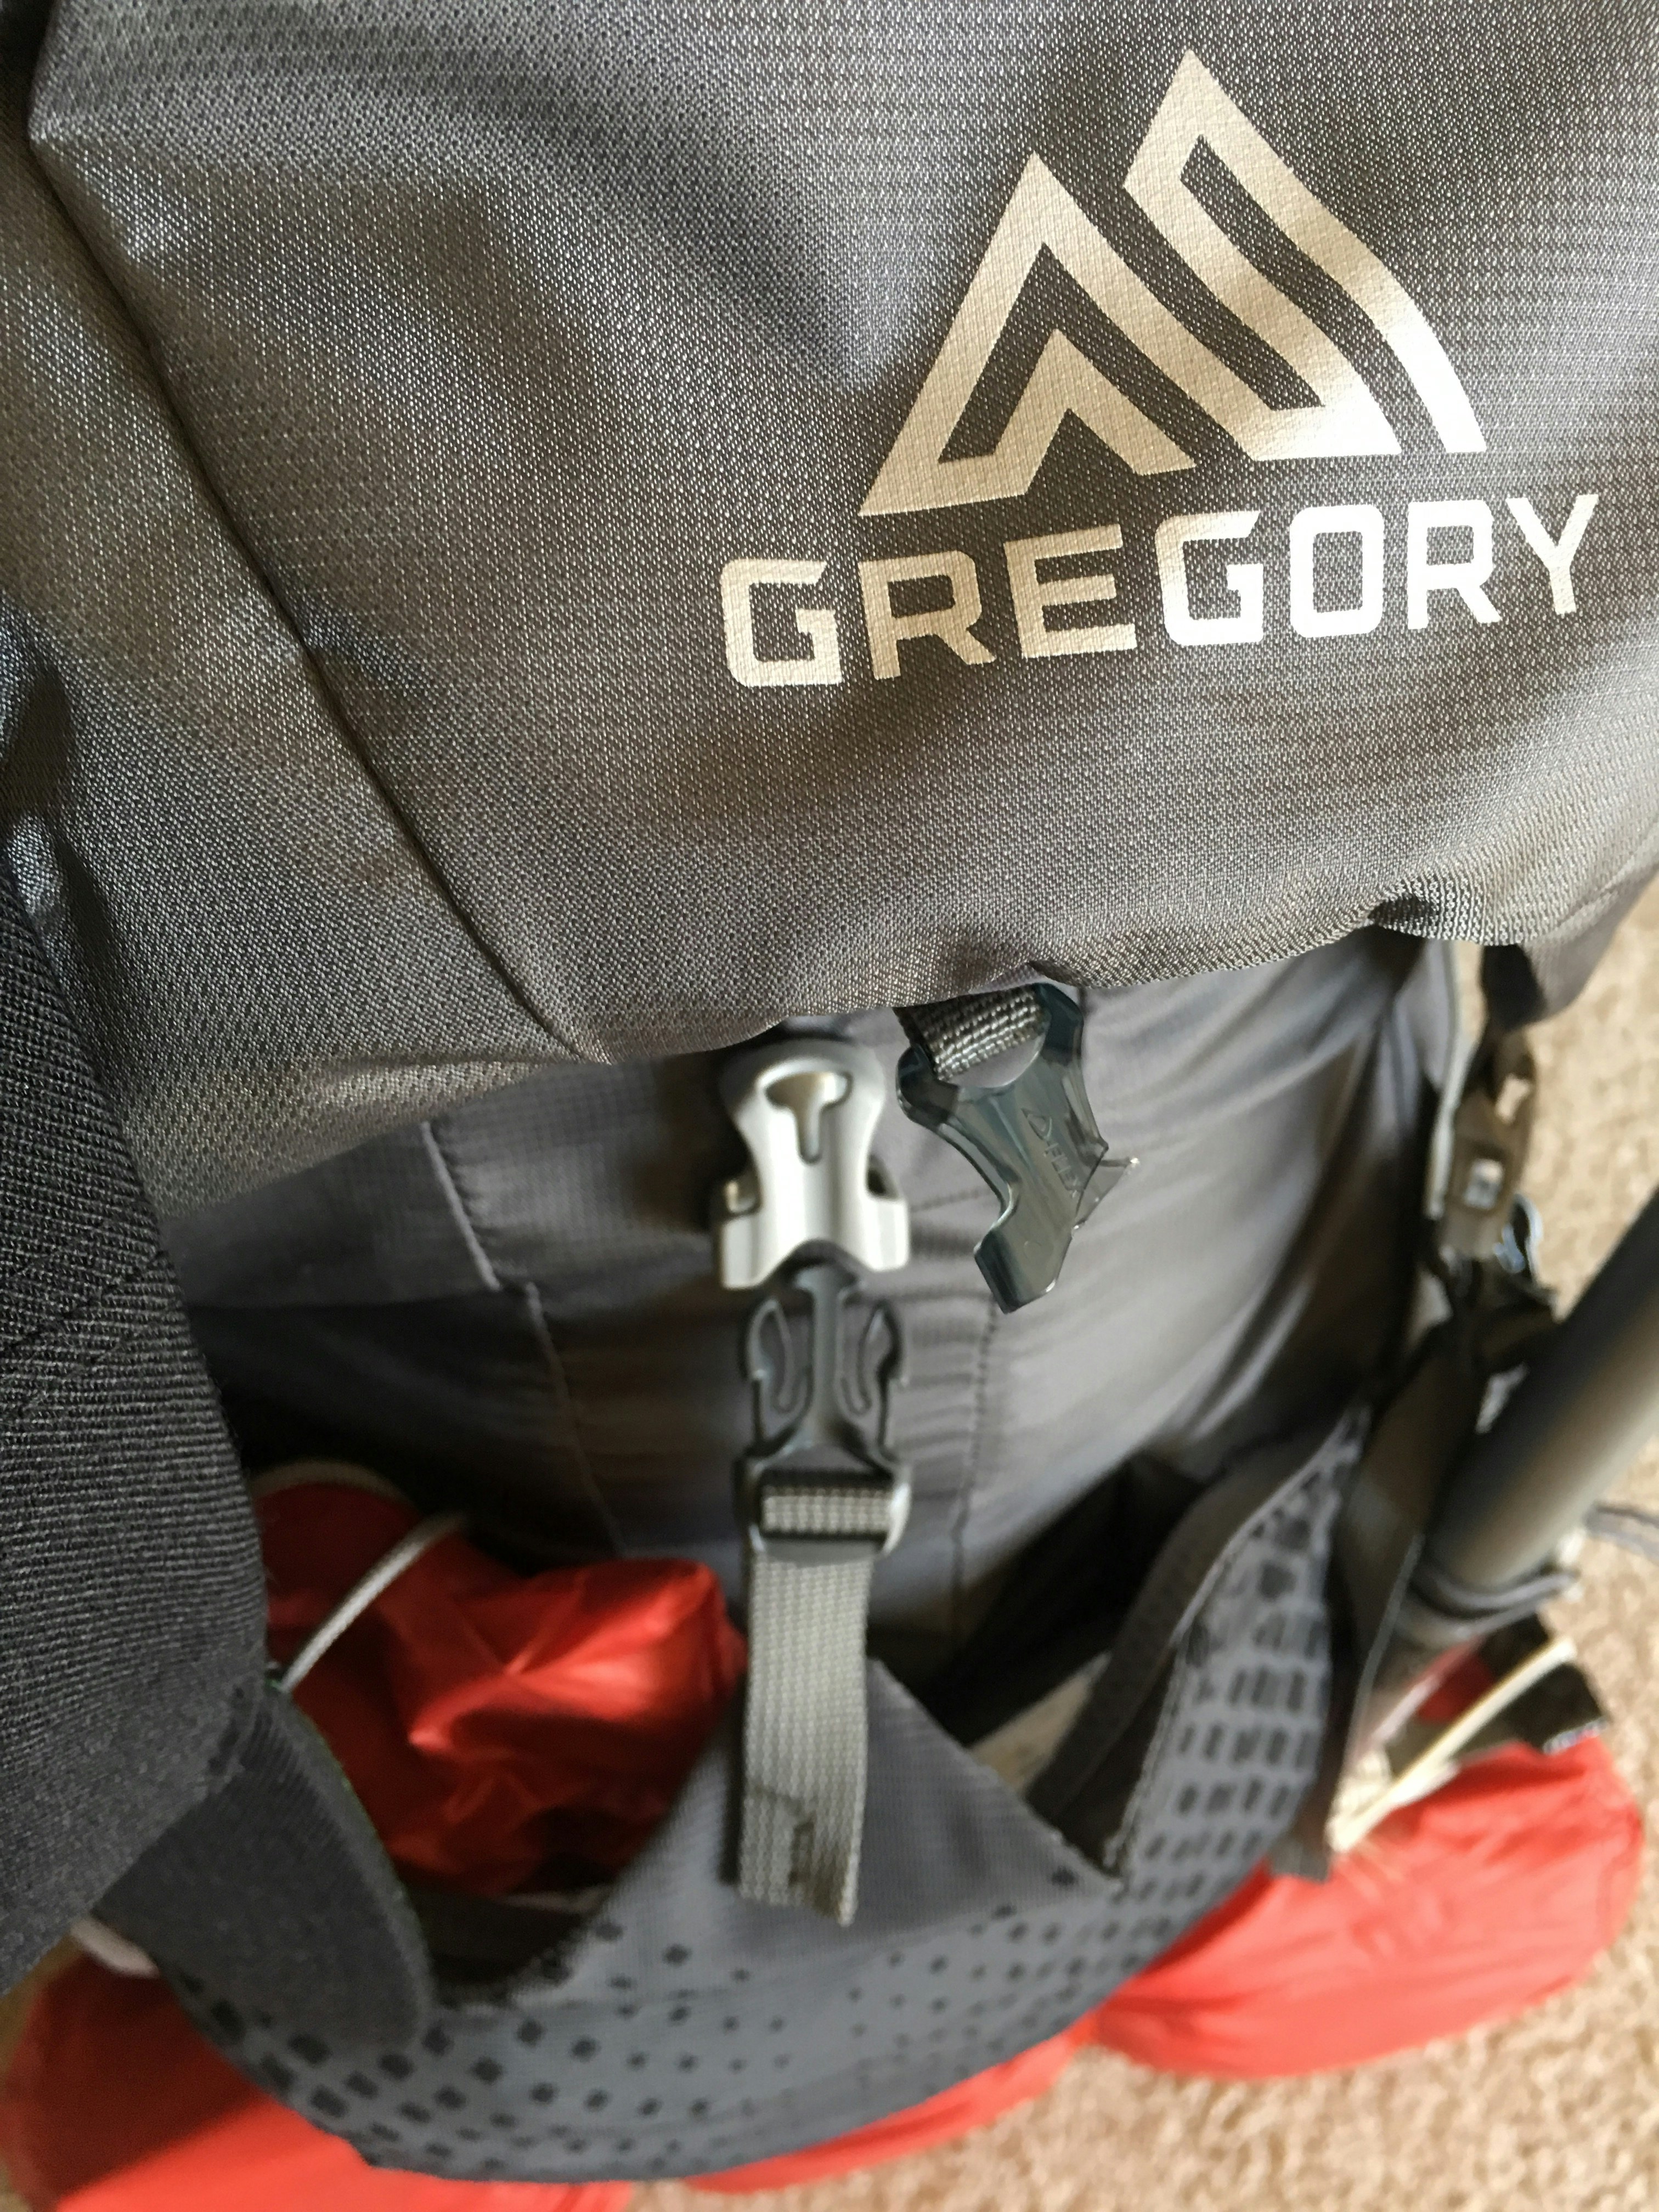 gregory backpack replacement parts